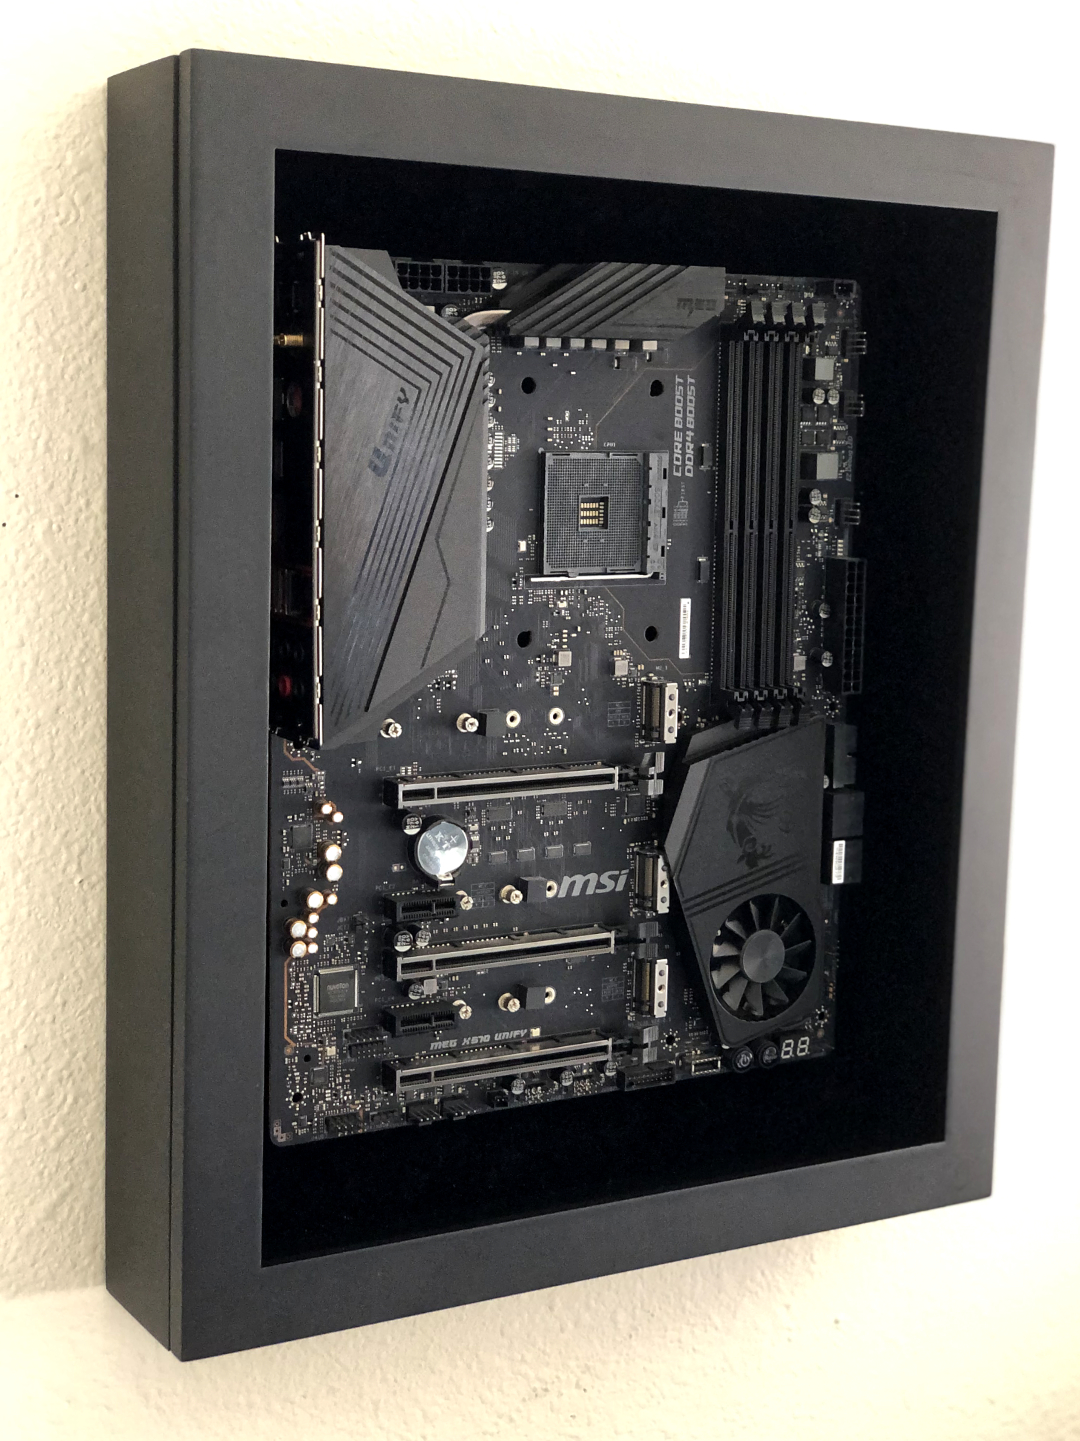 Wall-mounted motherboard